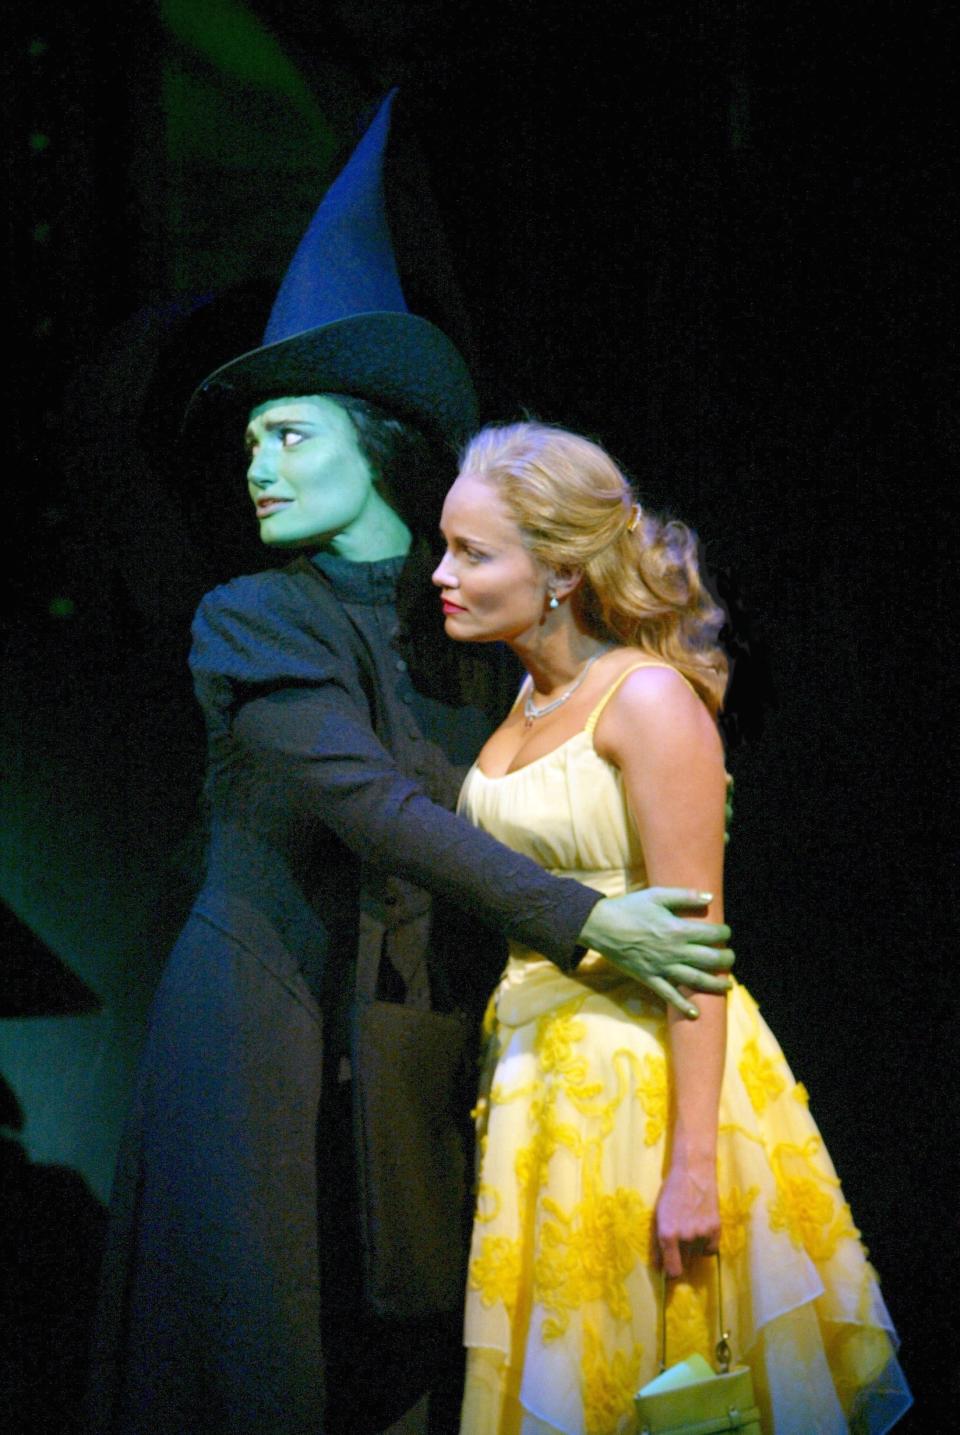 Idina Menzel and Kristin Chenoweth in a scene from the theatrical stage production Wicked. --- DATE TAKEN: rec'd 10/03 By JOAN MARCUS NoCredit  HO  - handout ORG XMIT: ZX8040